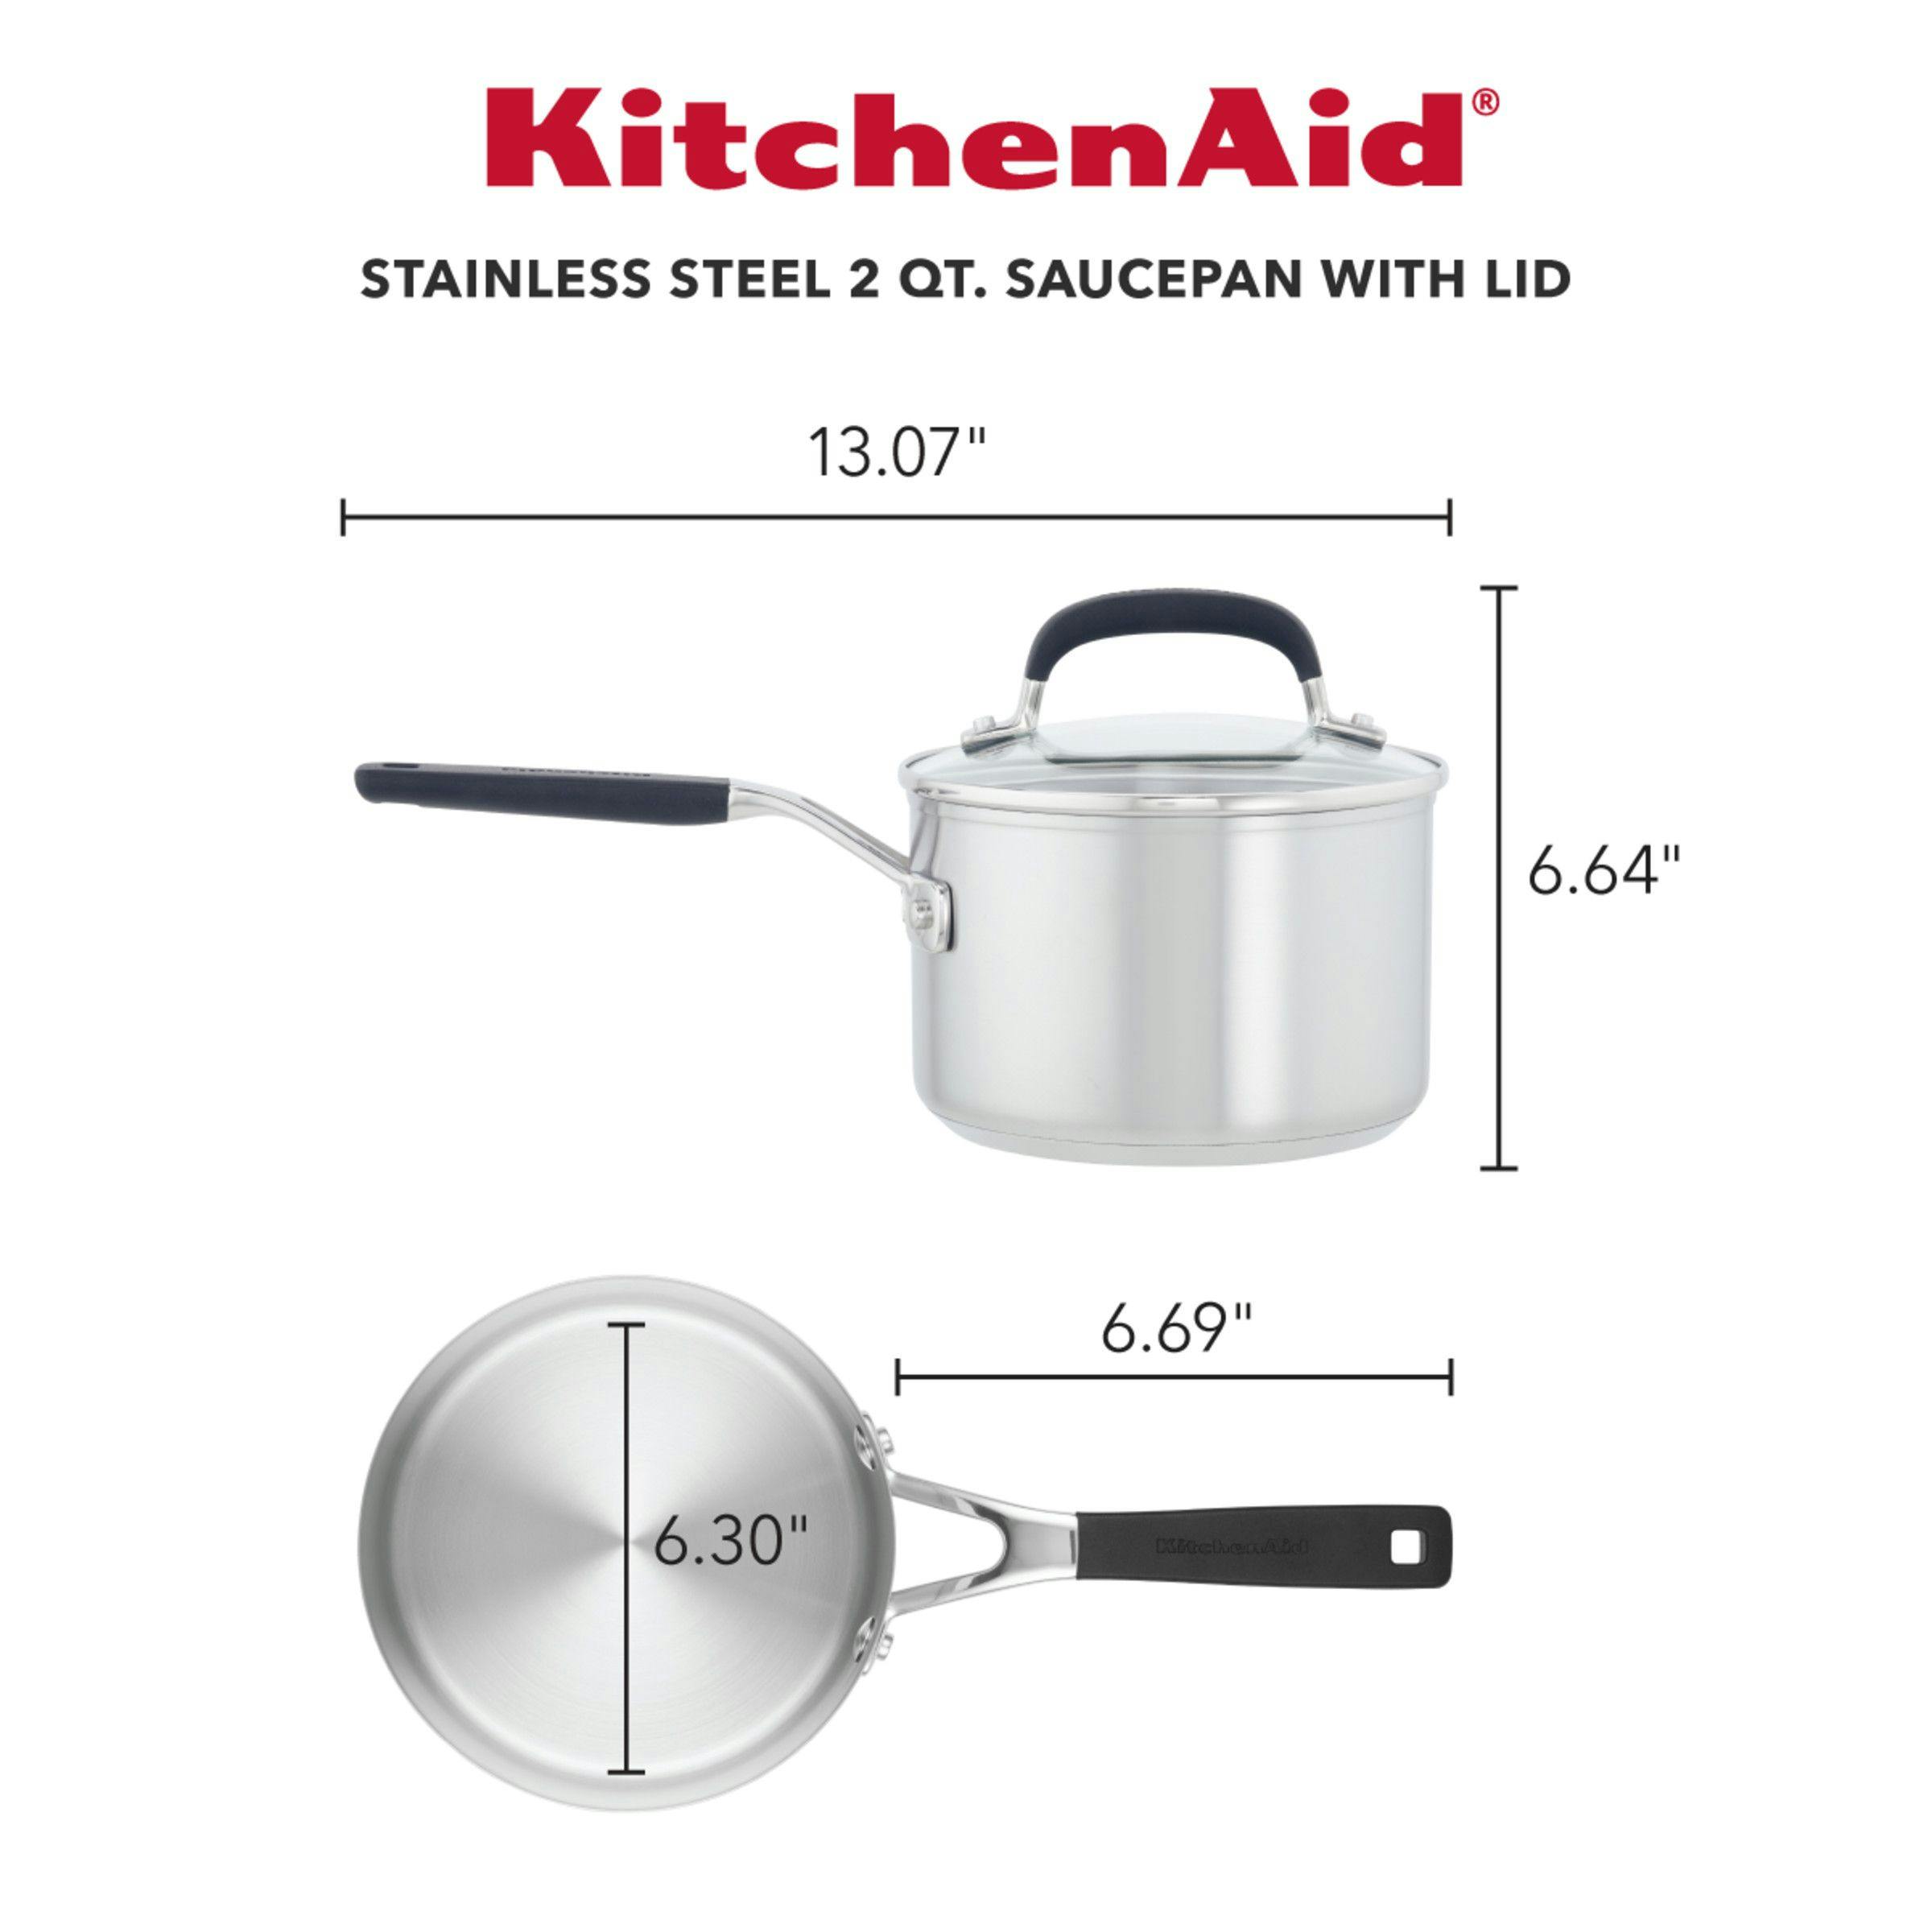 KitchenAid Stainless Steel Induction Saucepan with Measuring Marks and Lid, 2-Quart, Brushed Stainless Steel